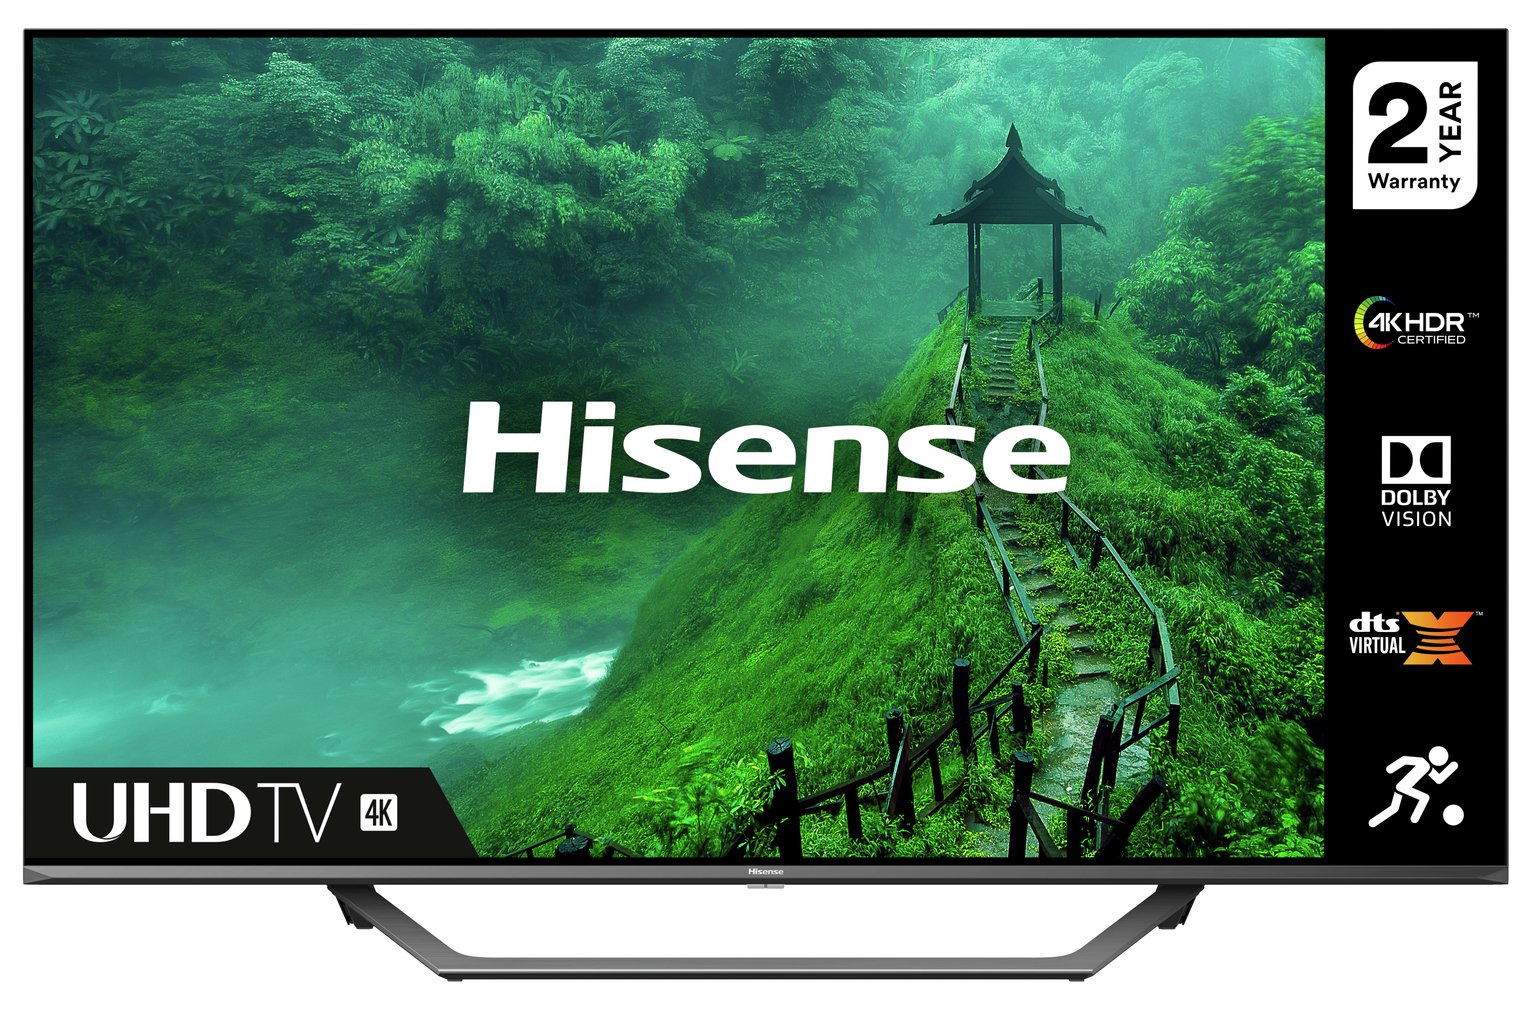 Hisense 65AE7400FT 65 Inch Smart 4K Ultra HD LED TV with HDR Review